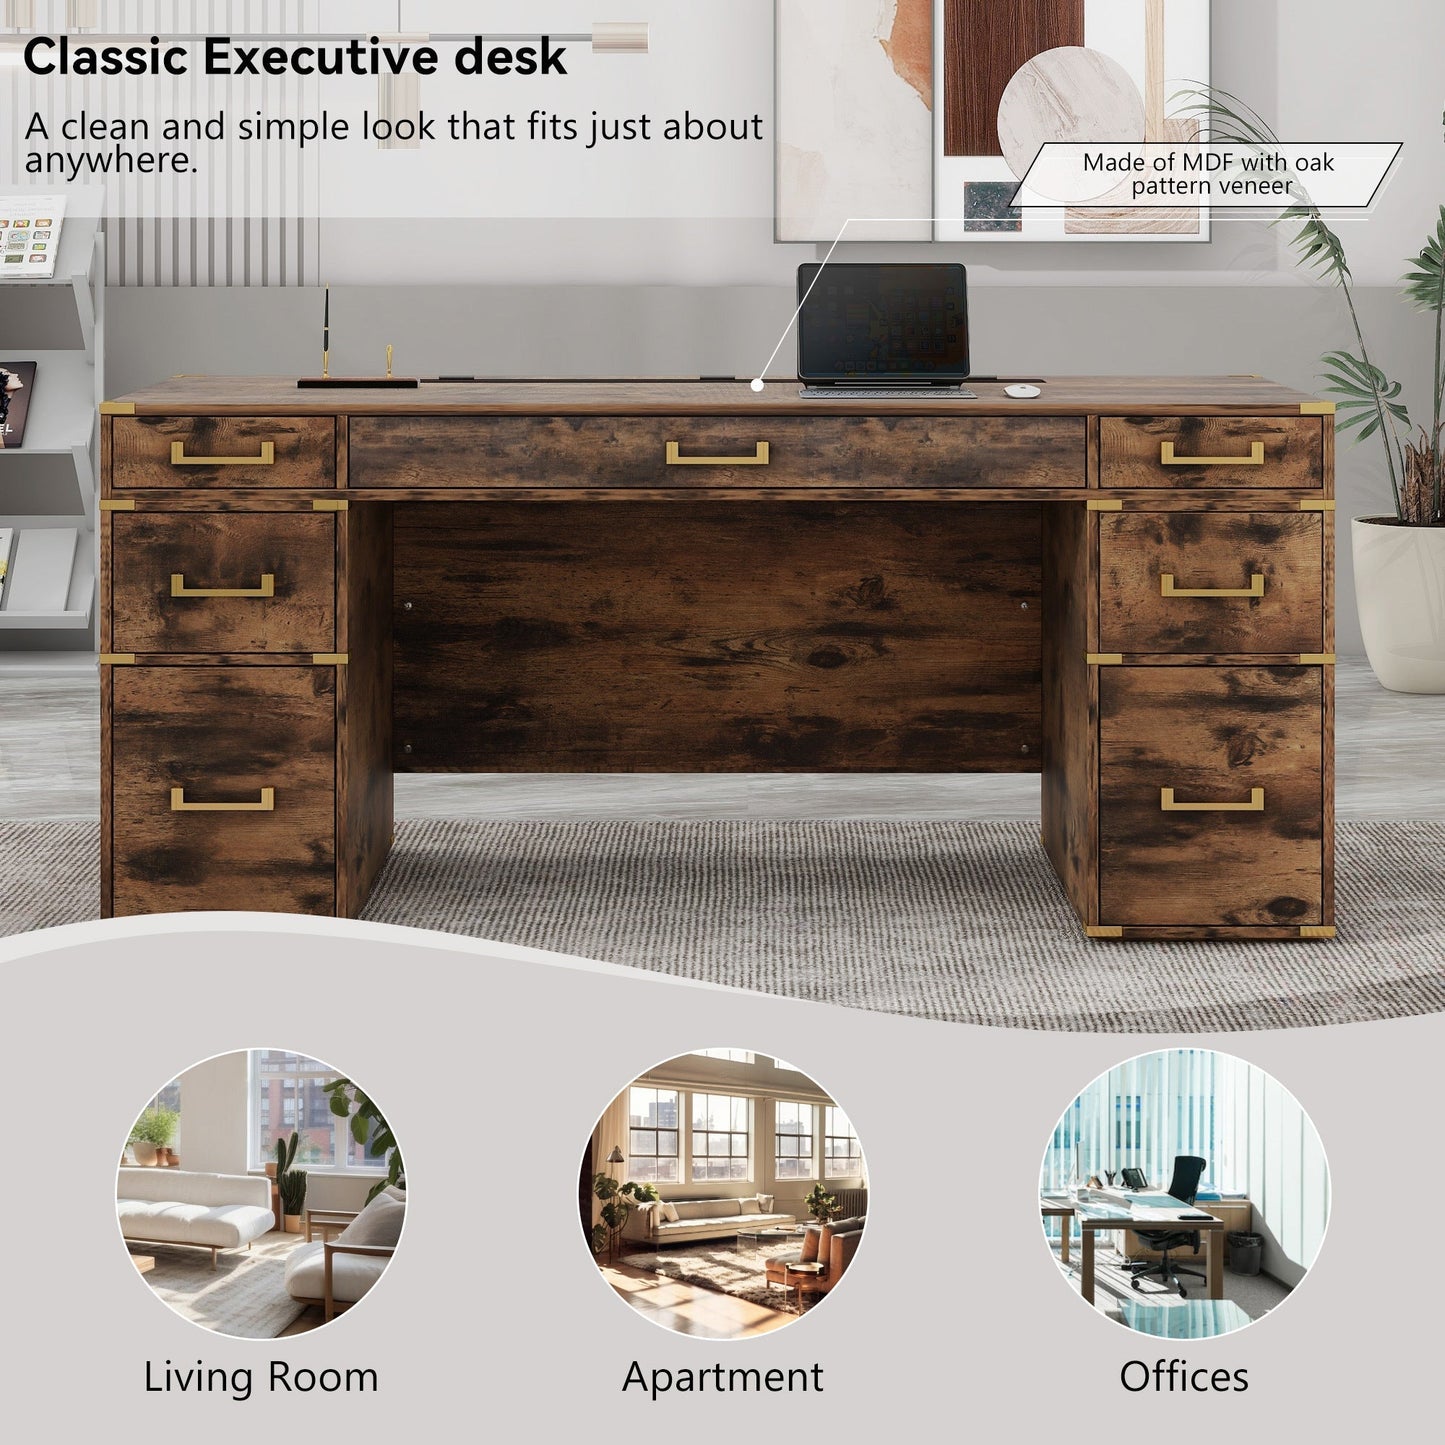 70"Classic and Traditional Executive Desk with Metal Edge Trim ,Writing Desk with 2 file drawers,USB Ports and Outlets,Desk with Hidden Compartment for Living Room,Home Office,Study Room,Brown